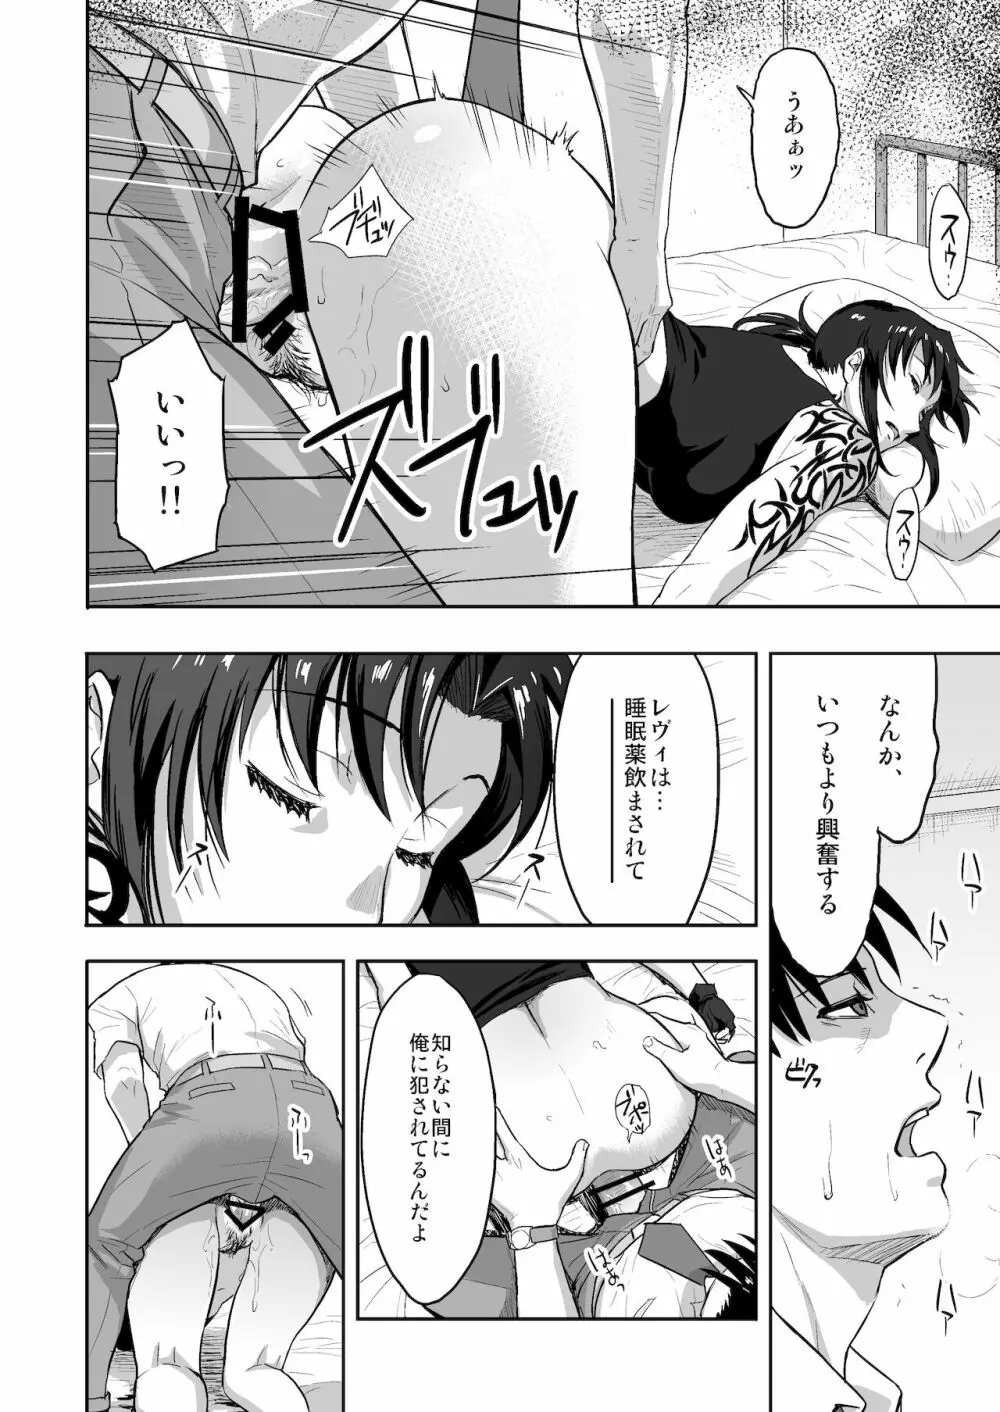 SLEEPING Revy - page11